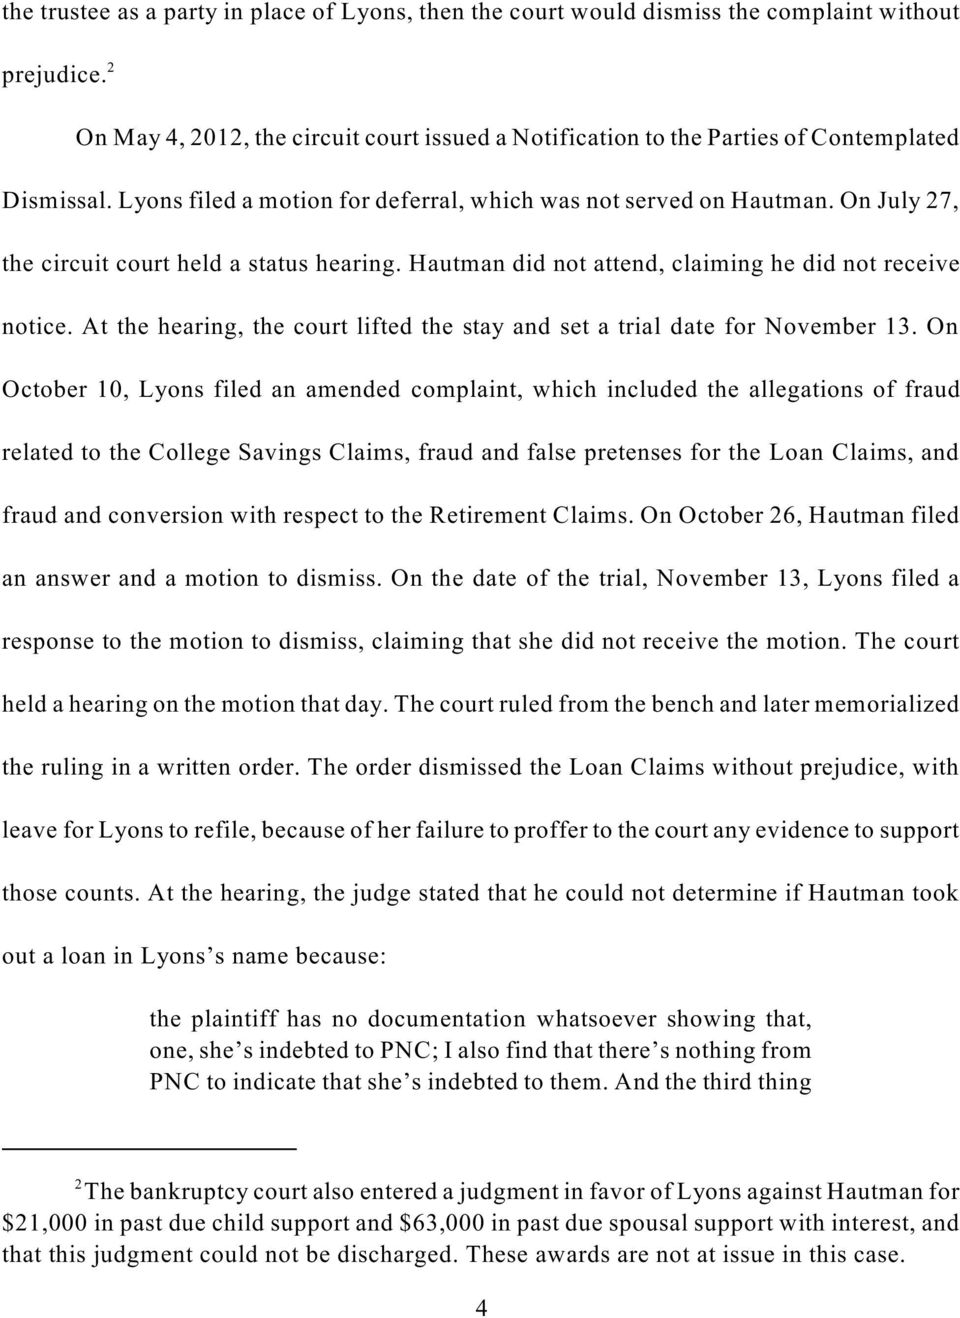 On July 27, the circuit court held a status hearing. Hautman did not attend, claiming he did not receive notice. At the hearing, the court lifted the stay and set a trial date for November 13.